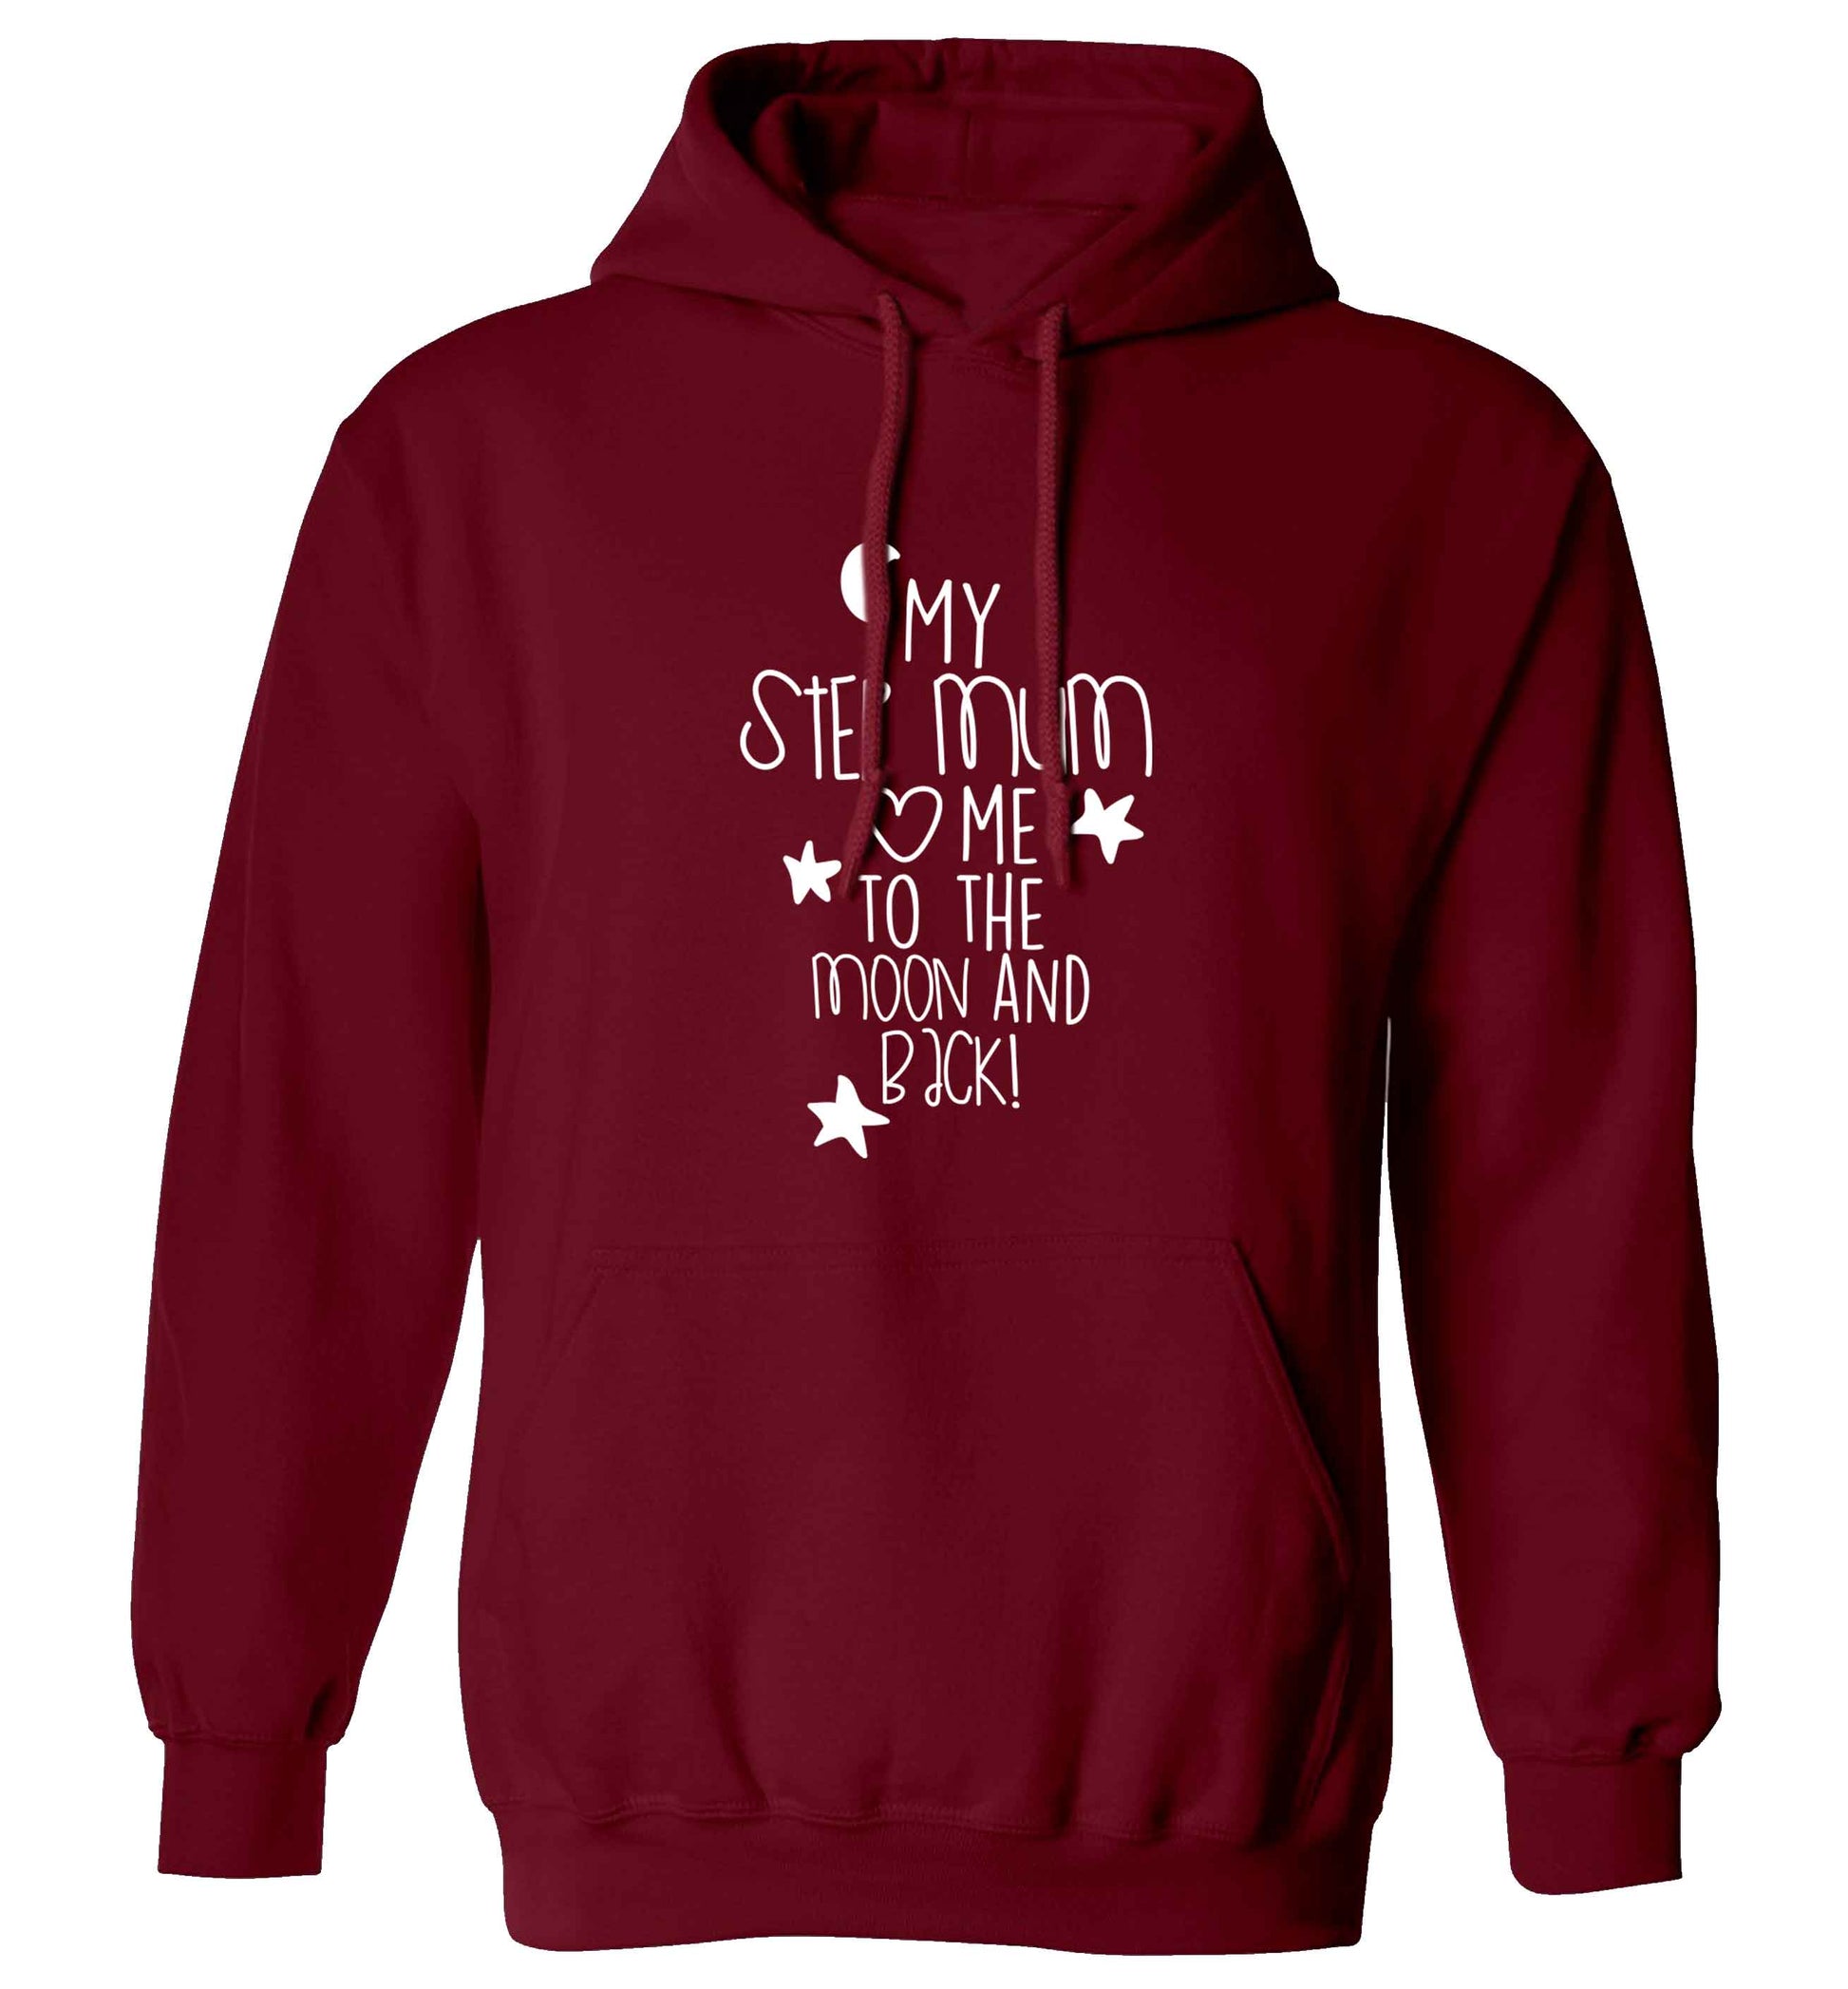 My step-mum loves me to the moon and back adults unisex maroon hoodie 2XL